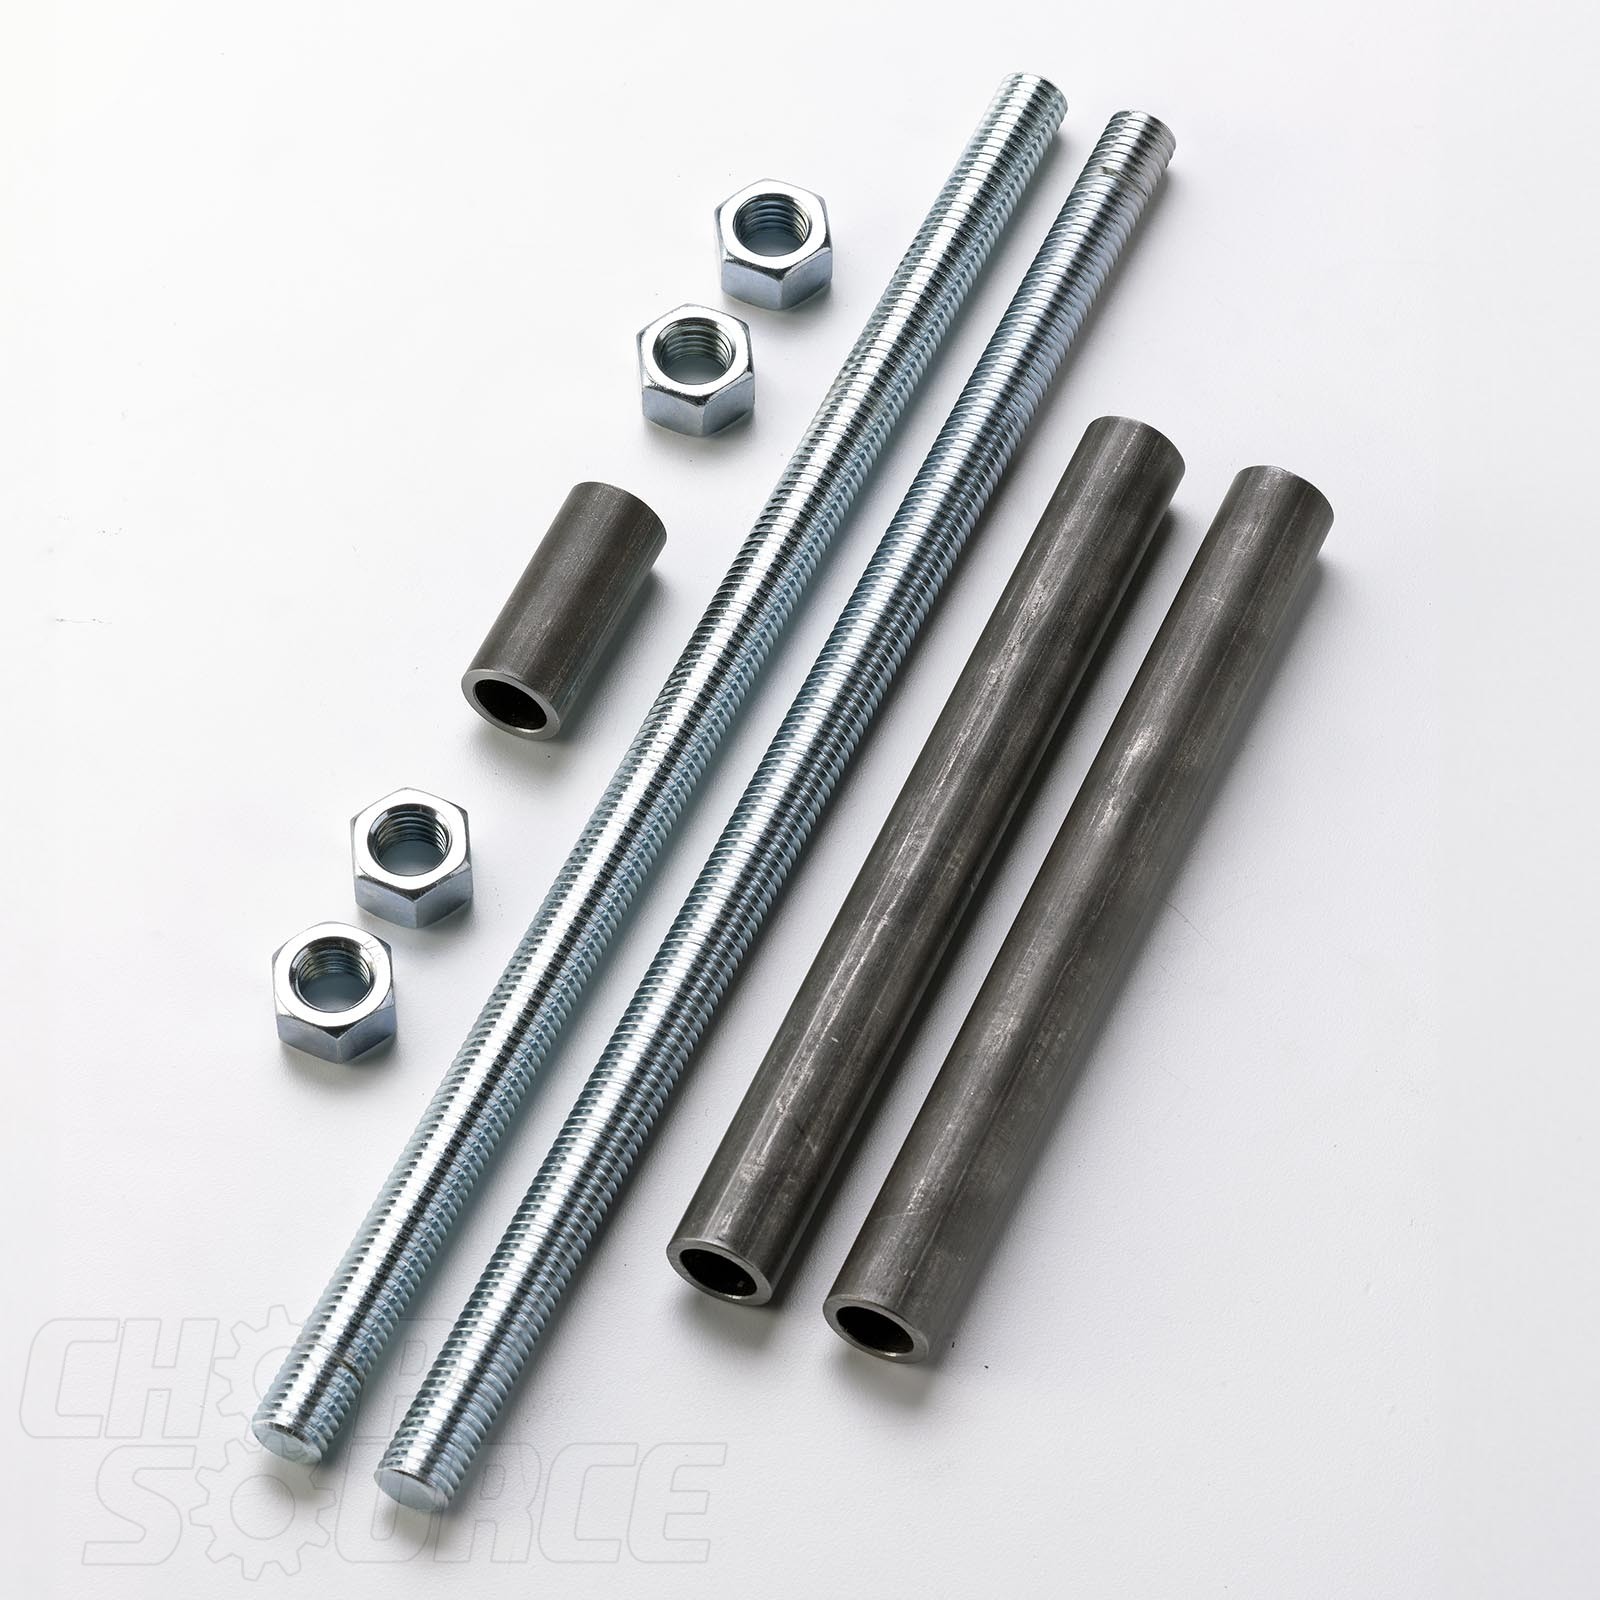 5/8" Threaded Rods with Spacer Material for Axle Plate Fixture